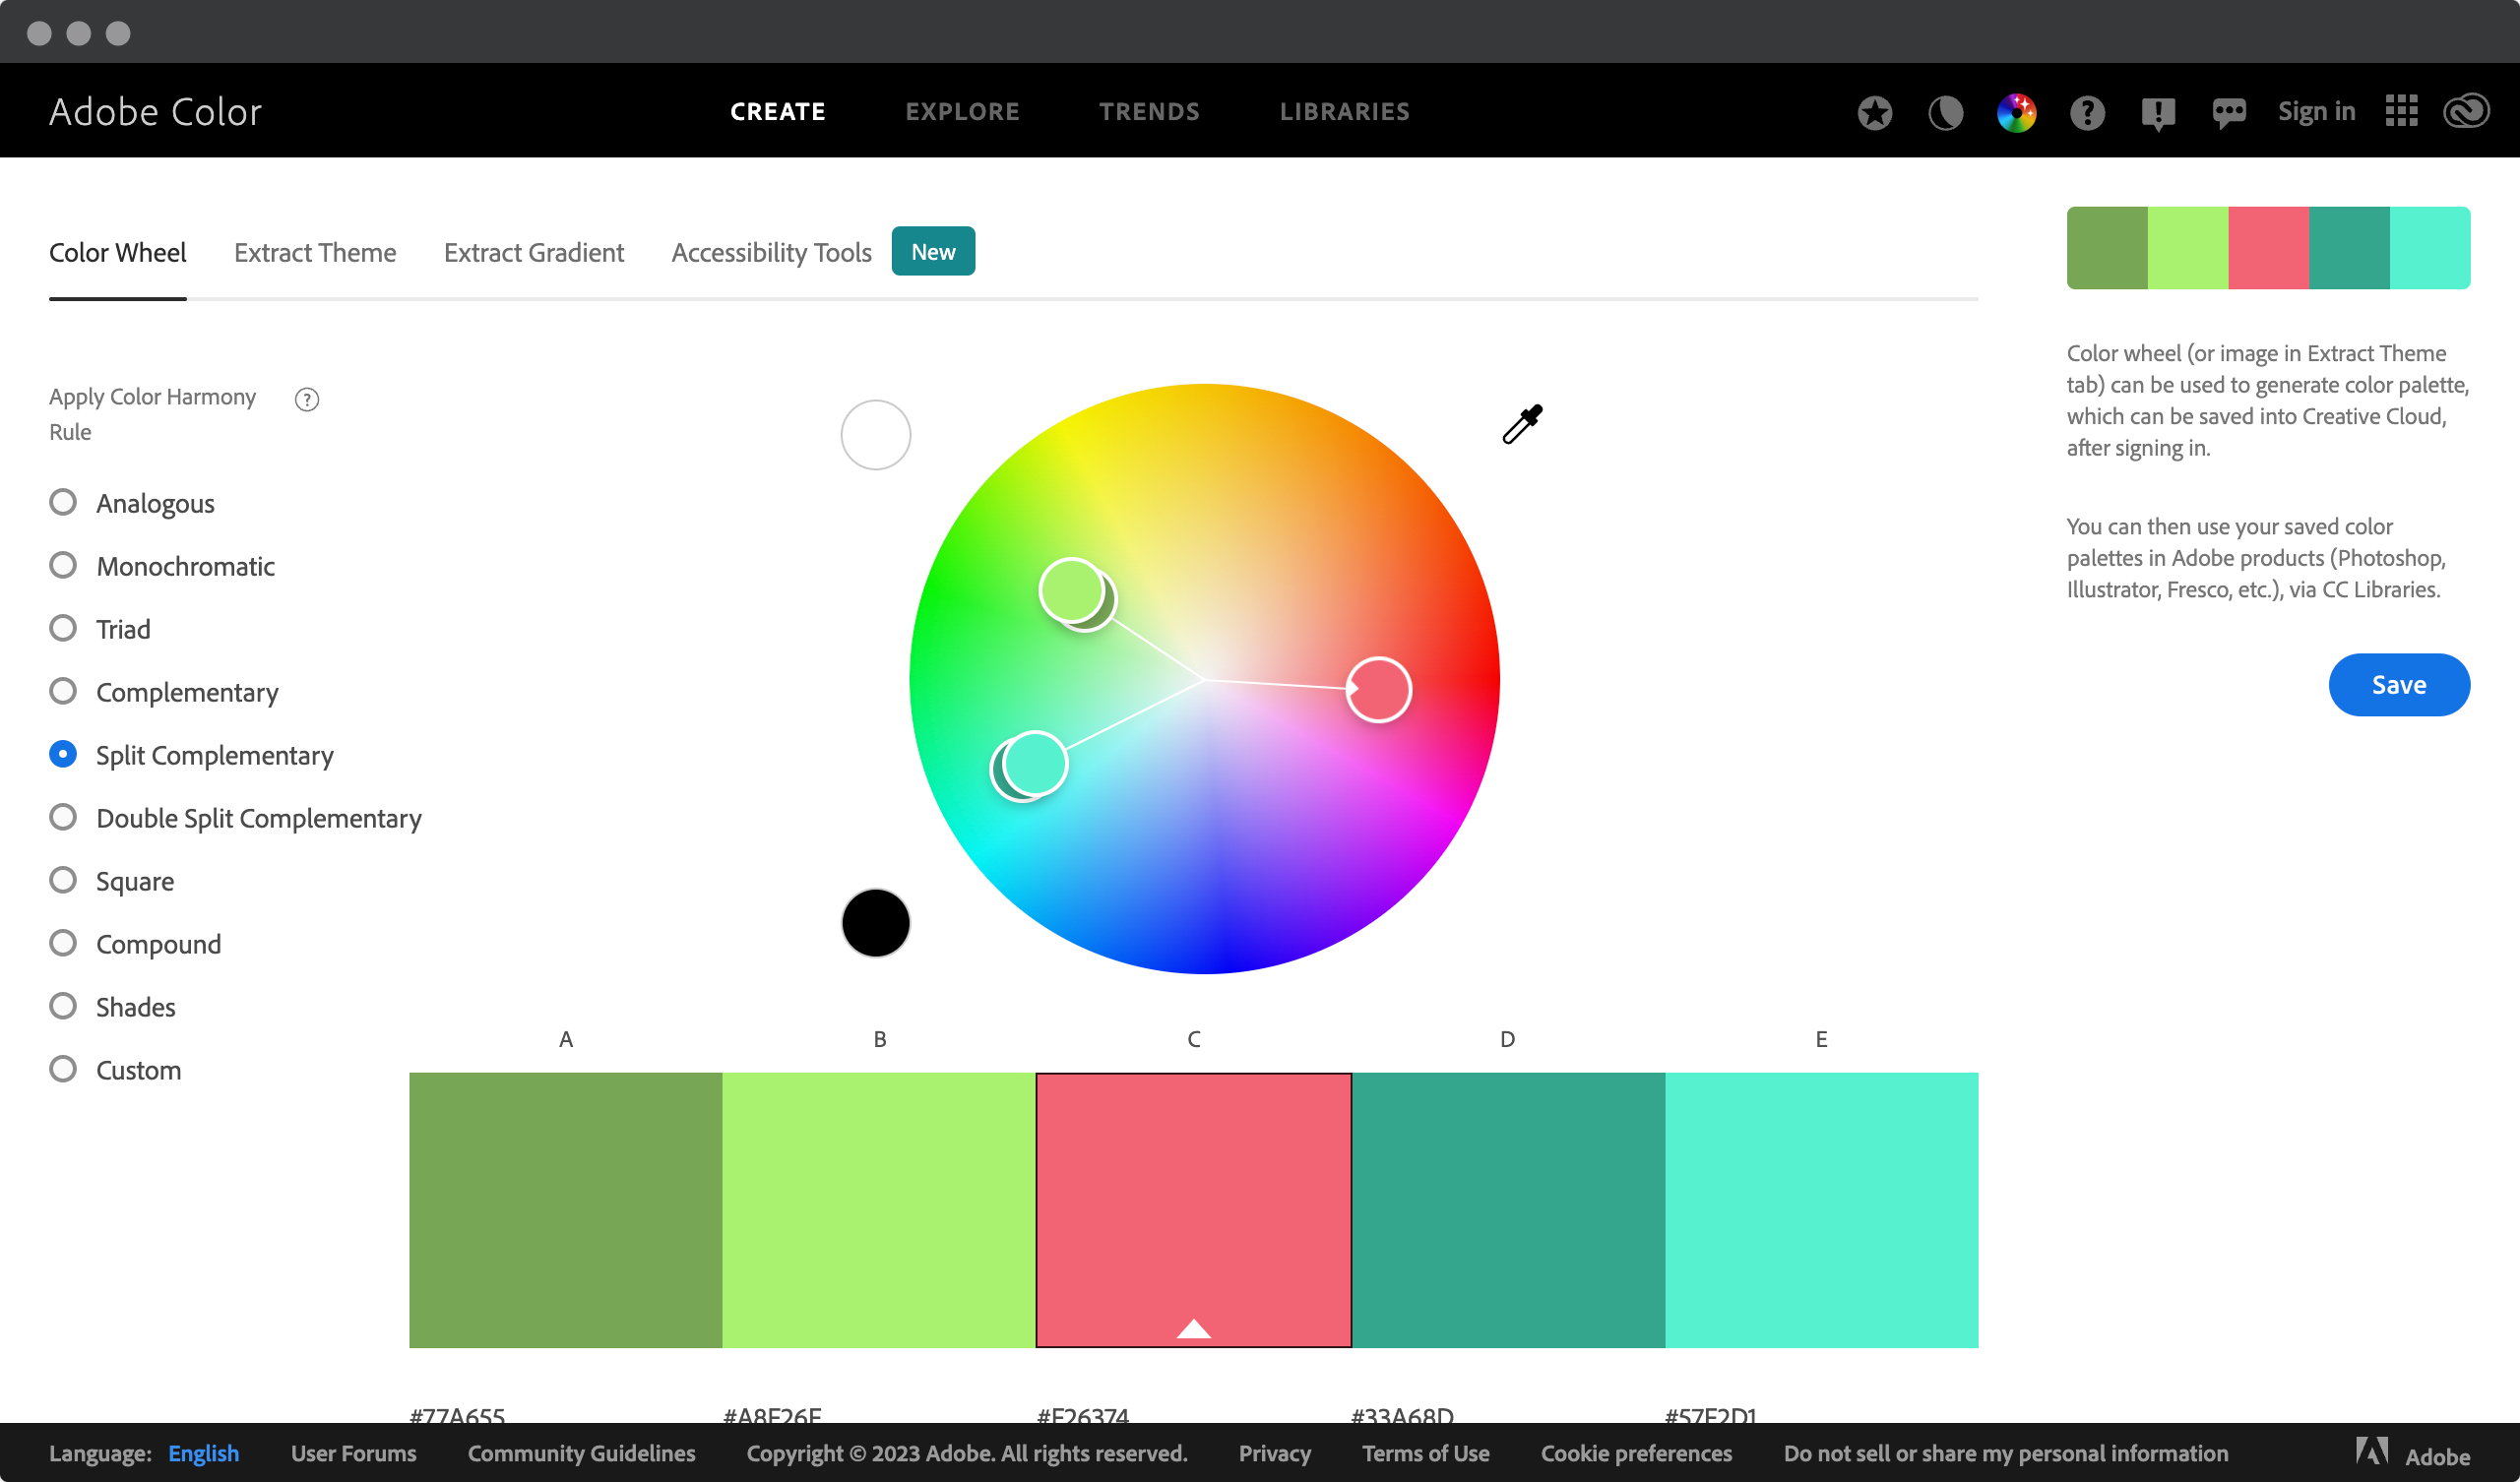 Screenshot of a Web page showing the split complementary colors in Adobe Color Wheel tool